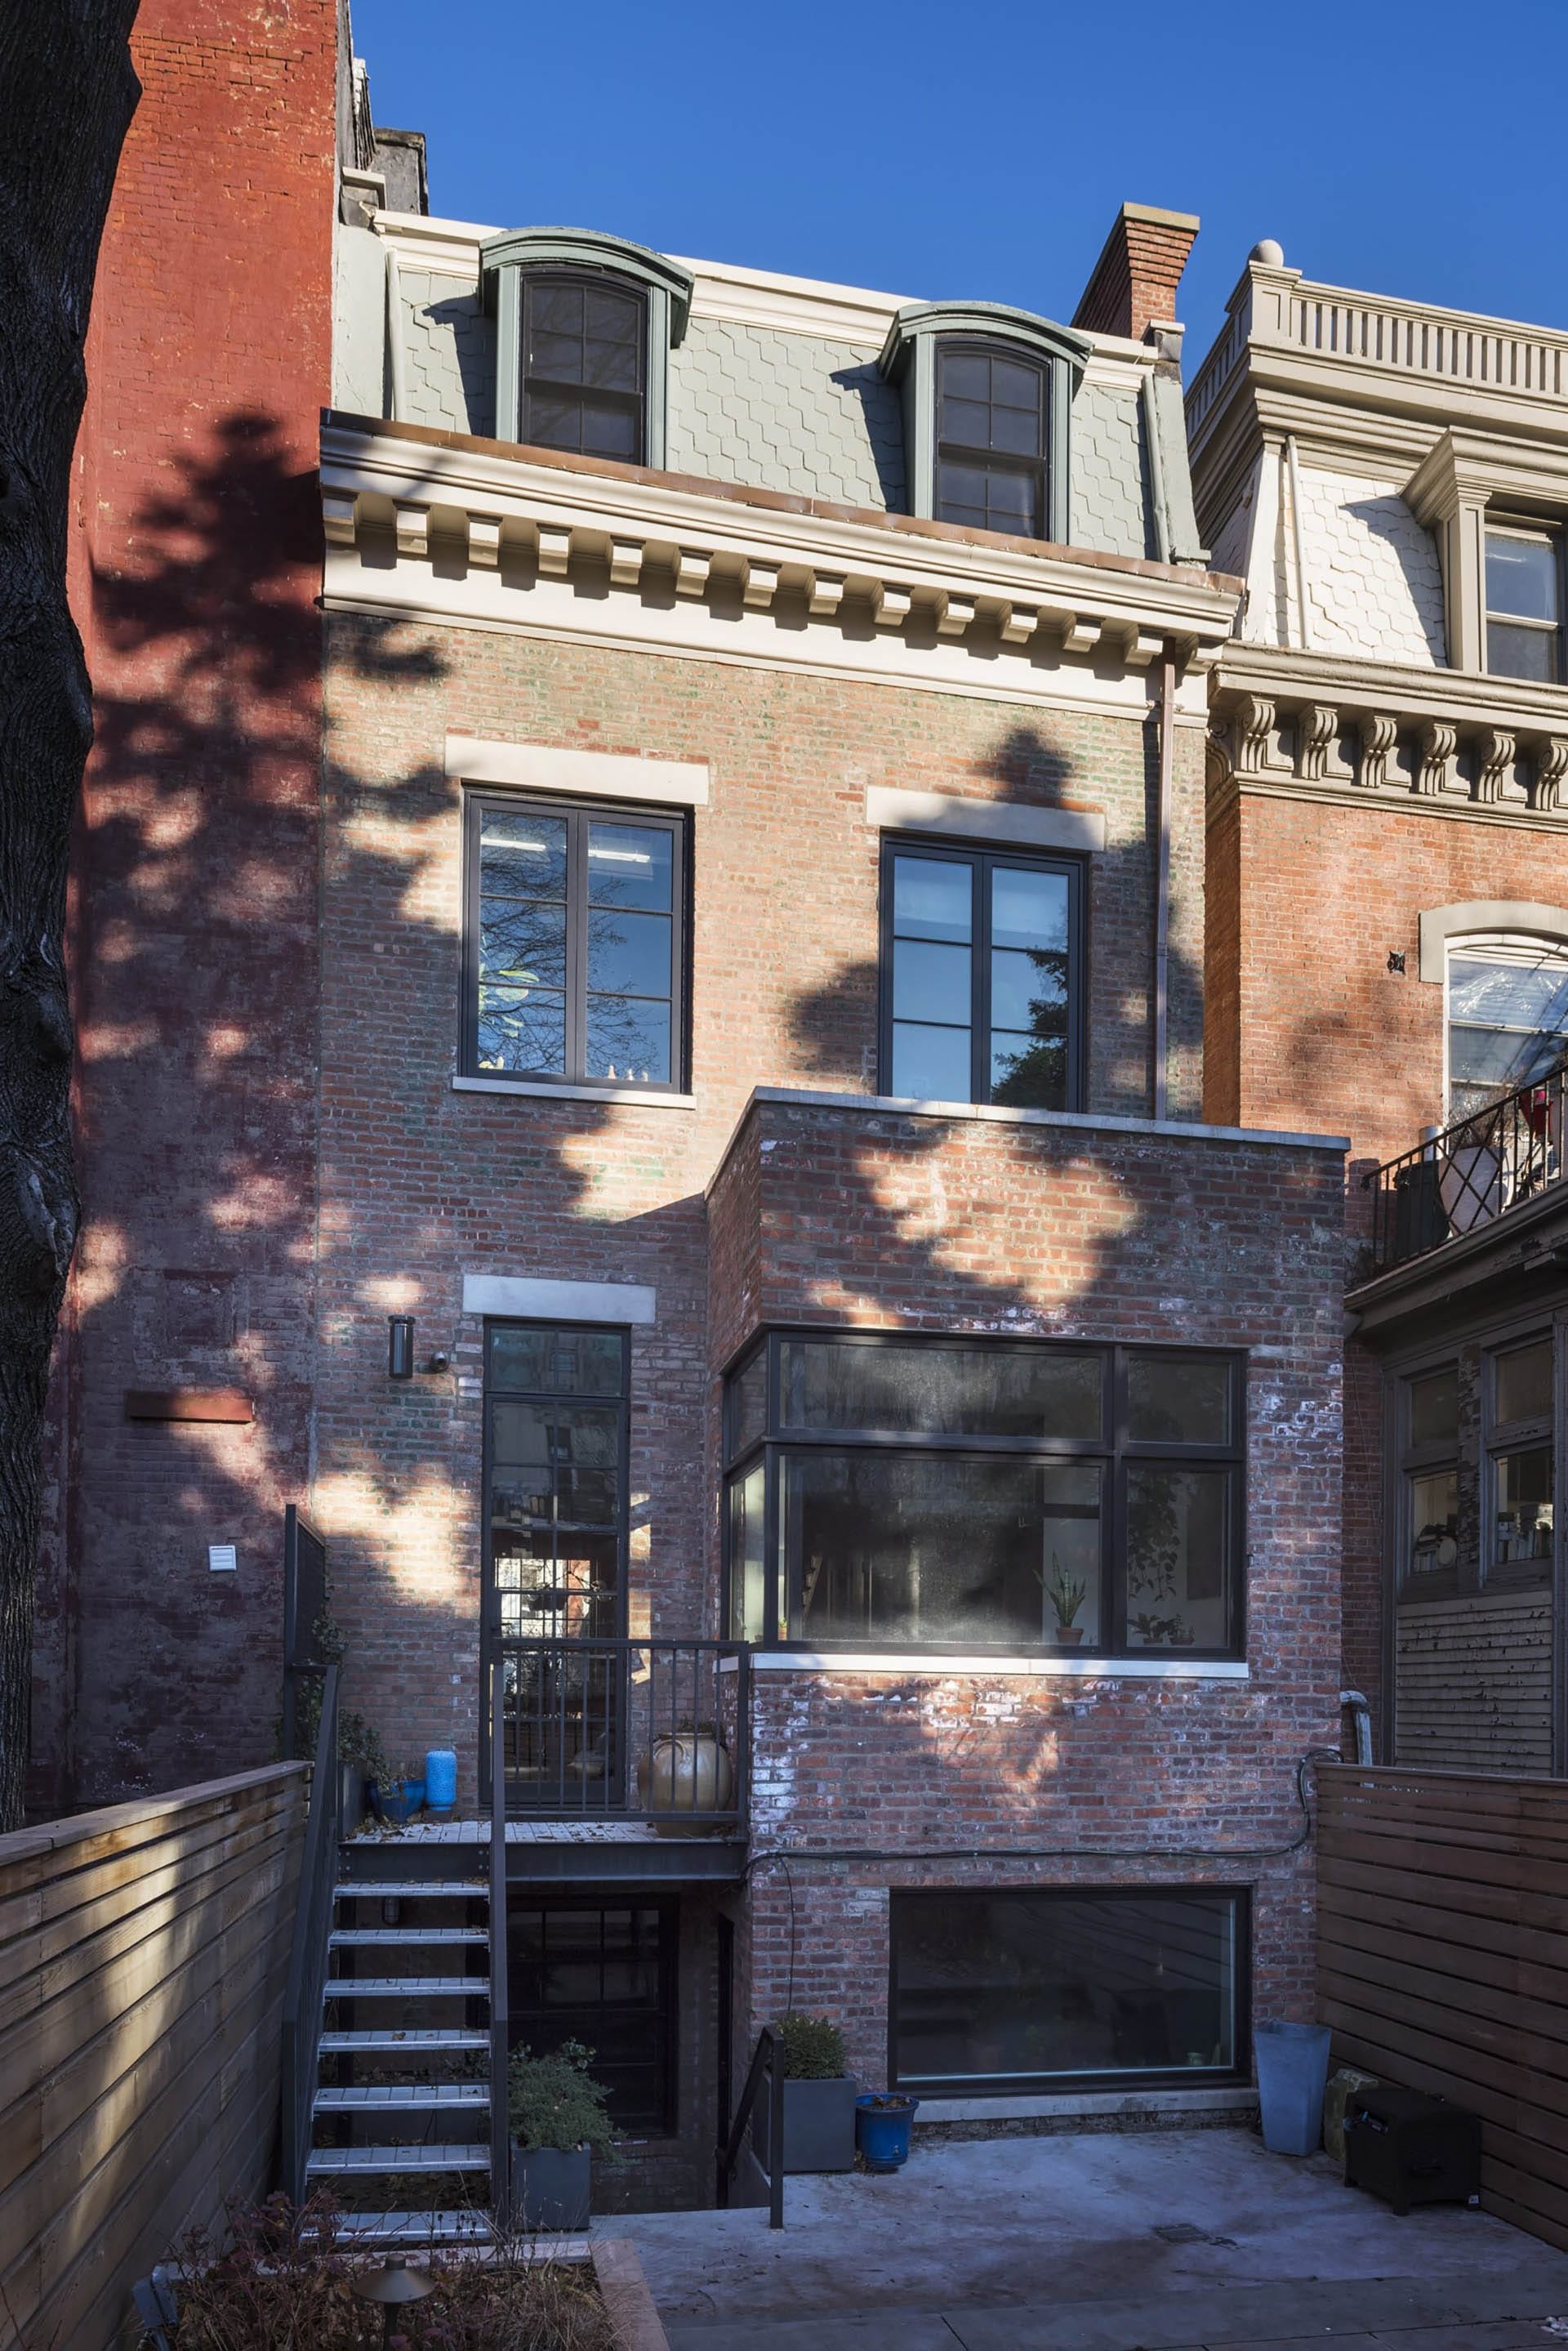 Refurbished brick rear façade of a Clinton Hill rowhome with restored shingles, new windows, and enlarged openings.